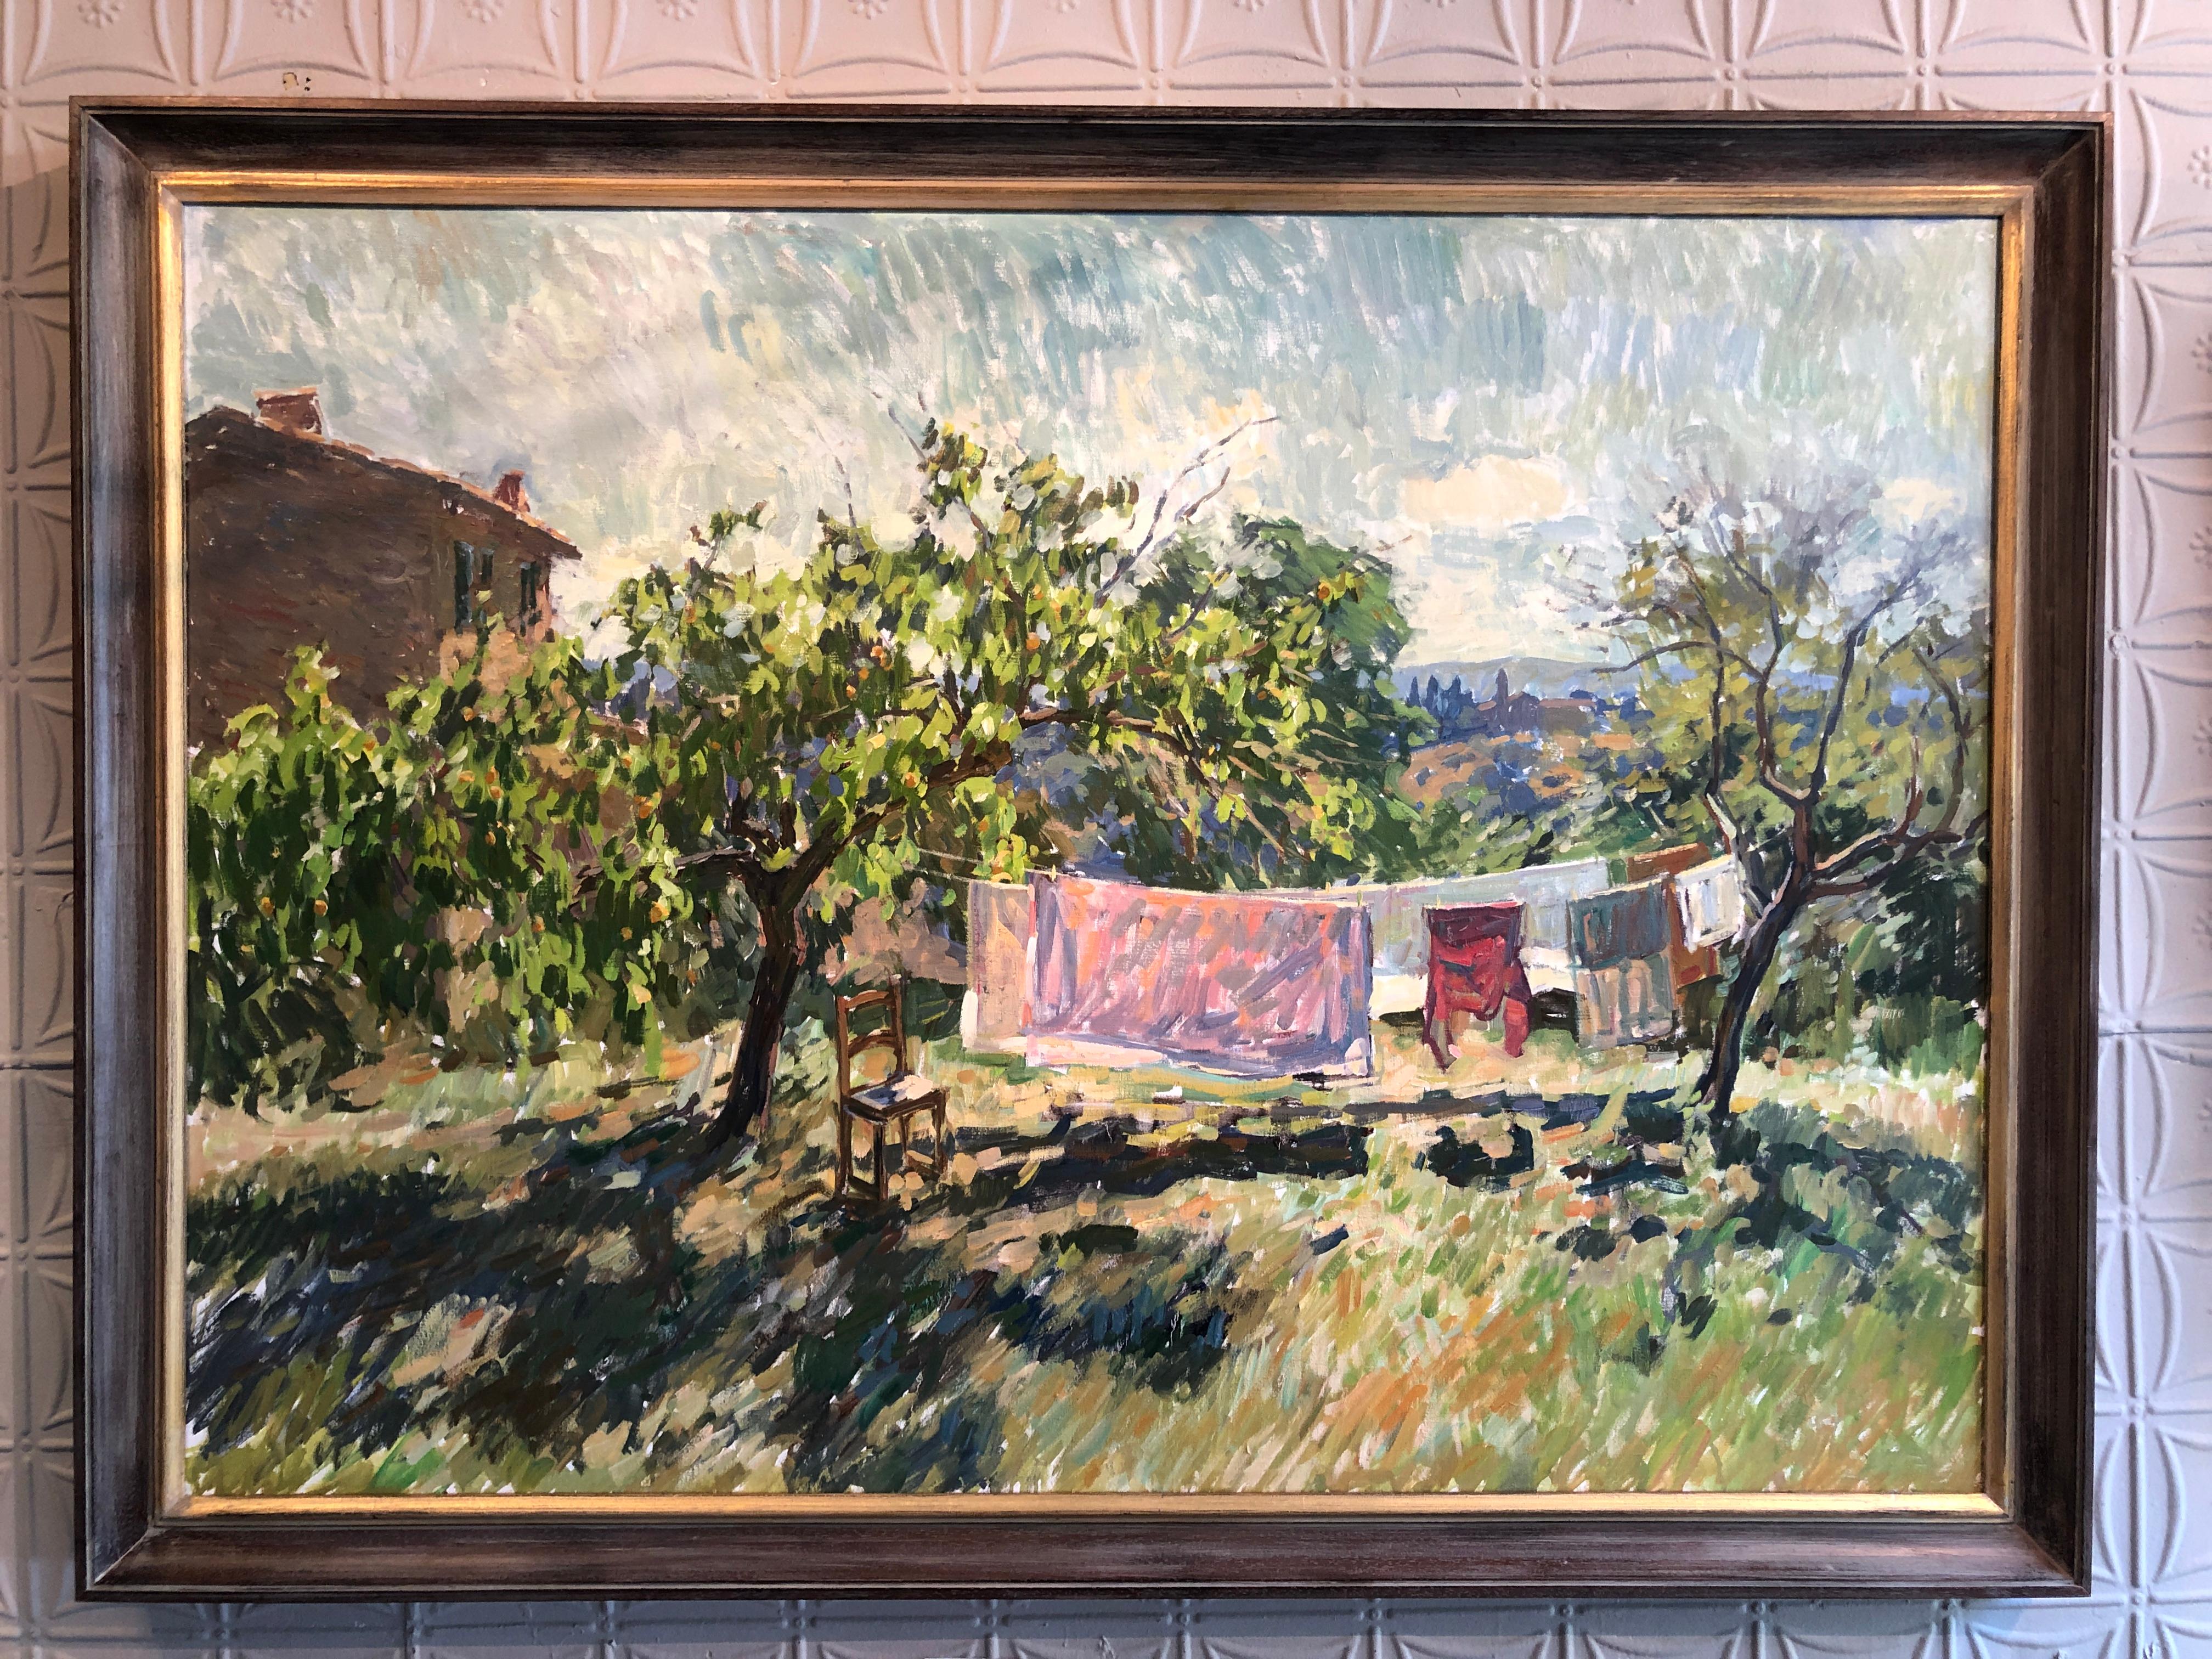 Apricots and Laundry - Painting by Ben Fenske